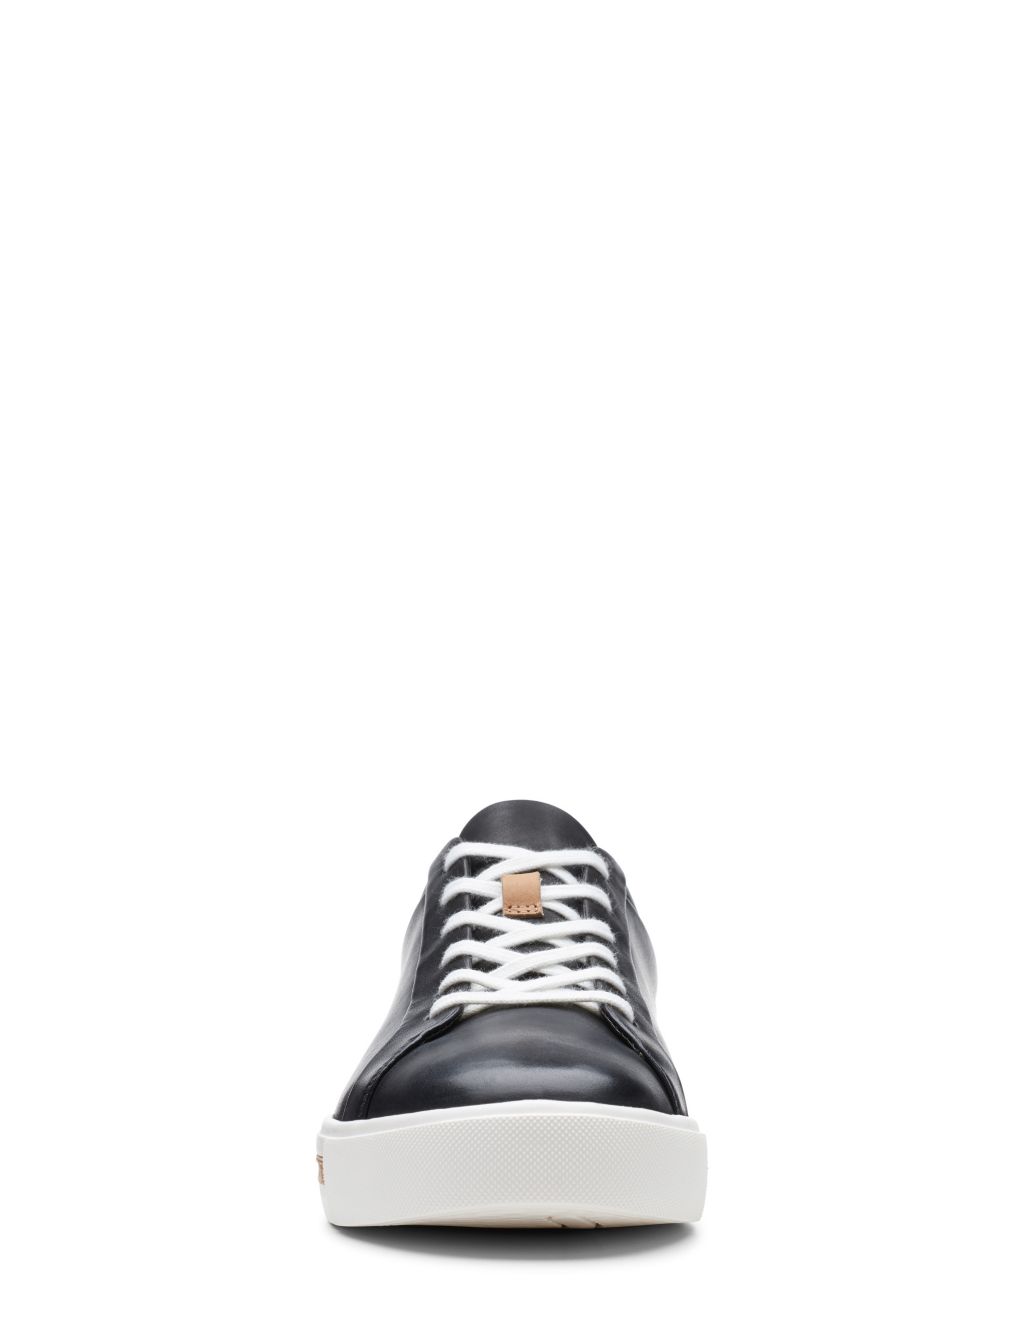 Wide Fit Leather Lace Up Trainers image 3